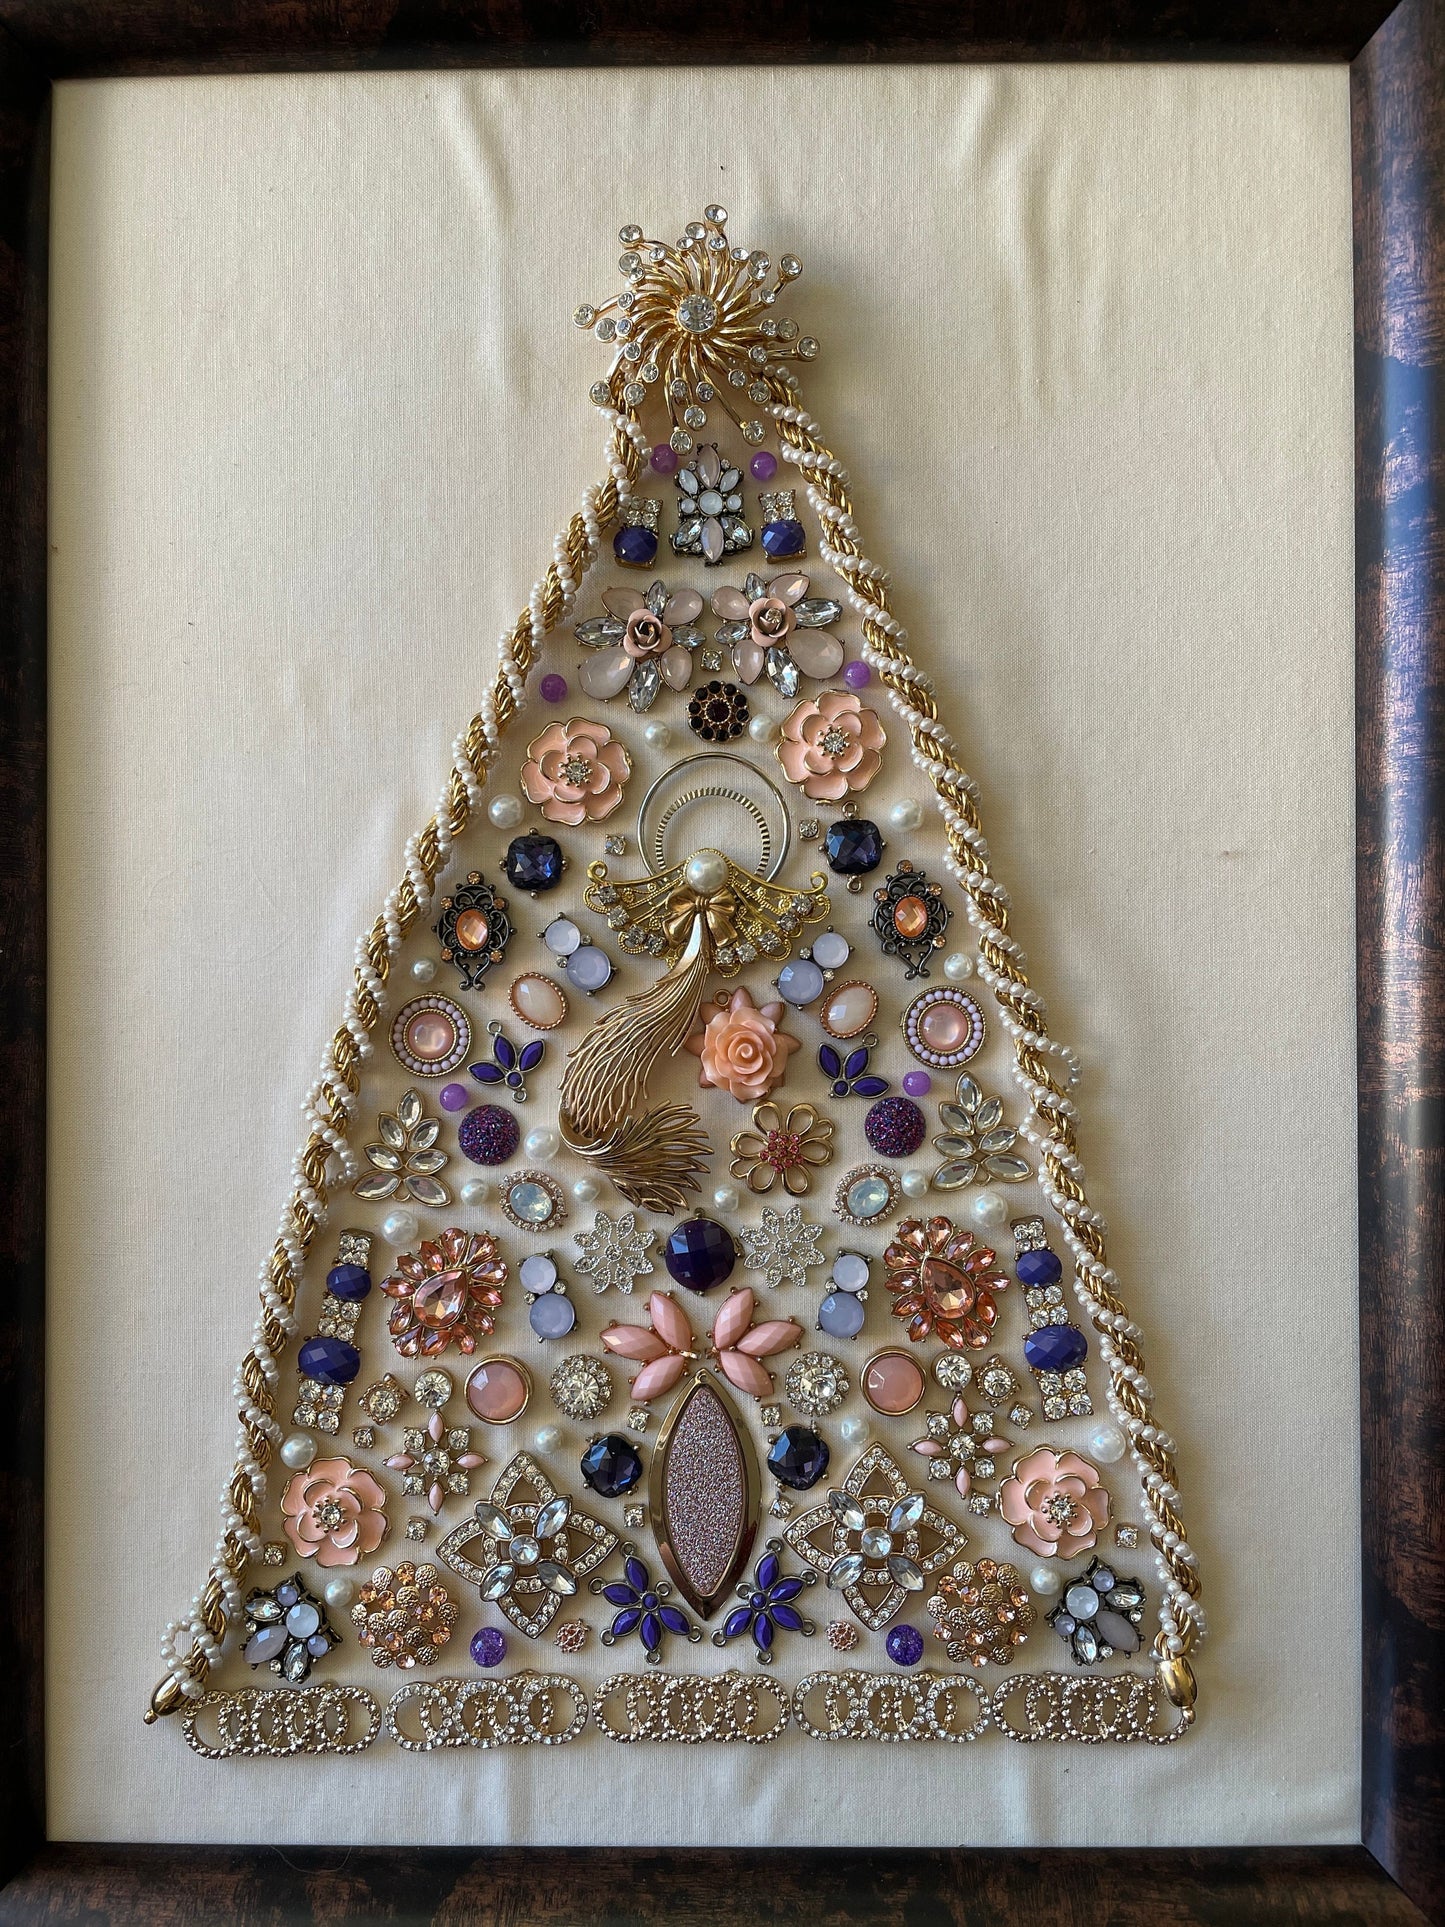 White, Purple, and Gold Framed Jewelry Christmas Tree Handmade with Over 70 Pieces of Vintage & Upcycled Jewelry